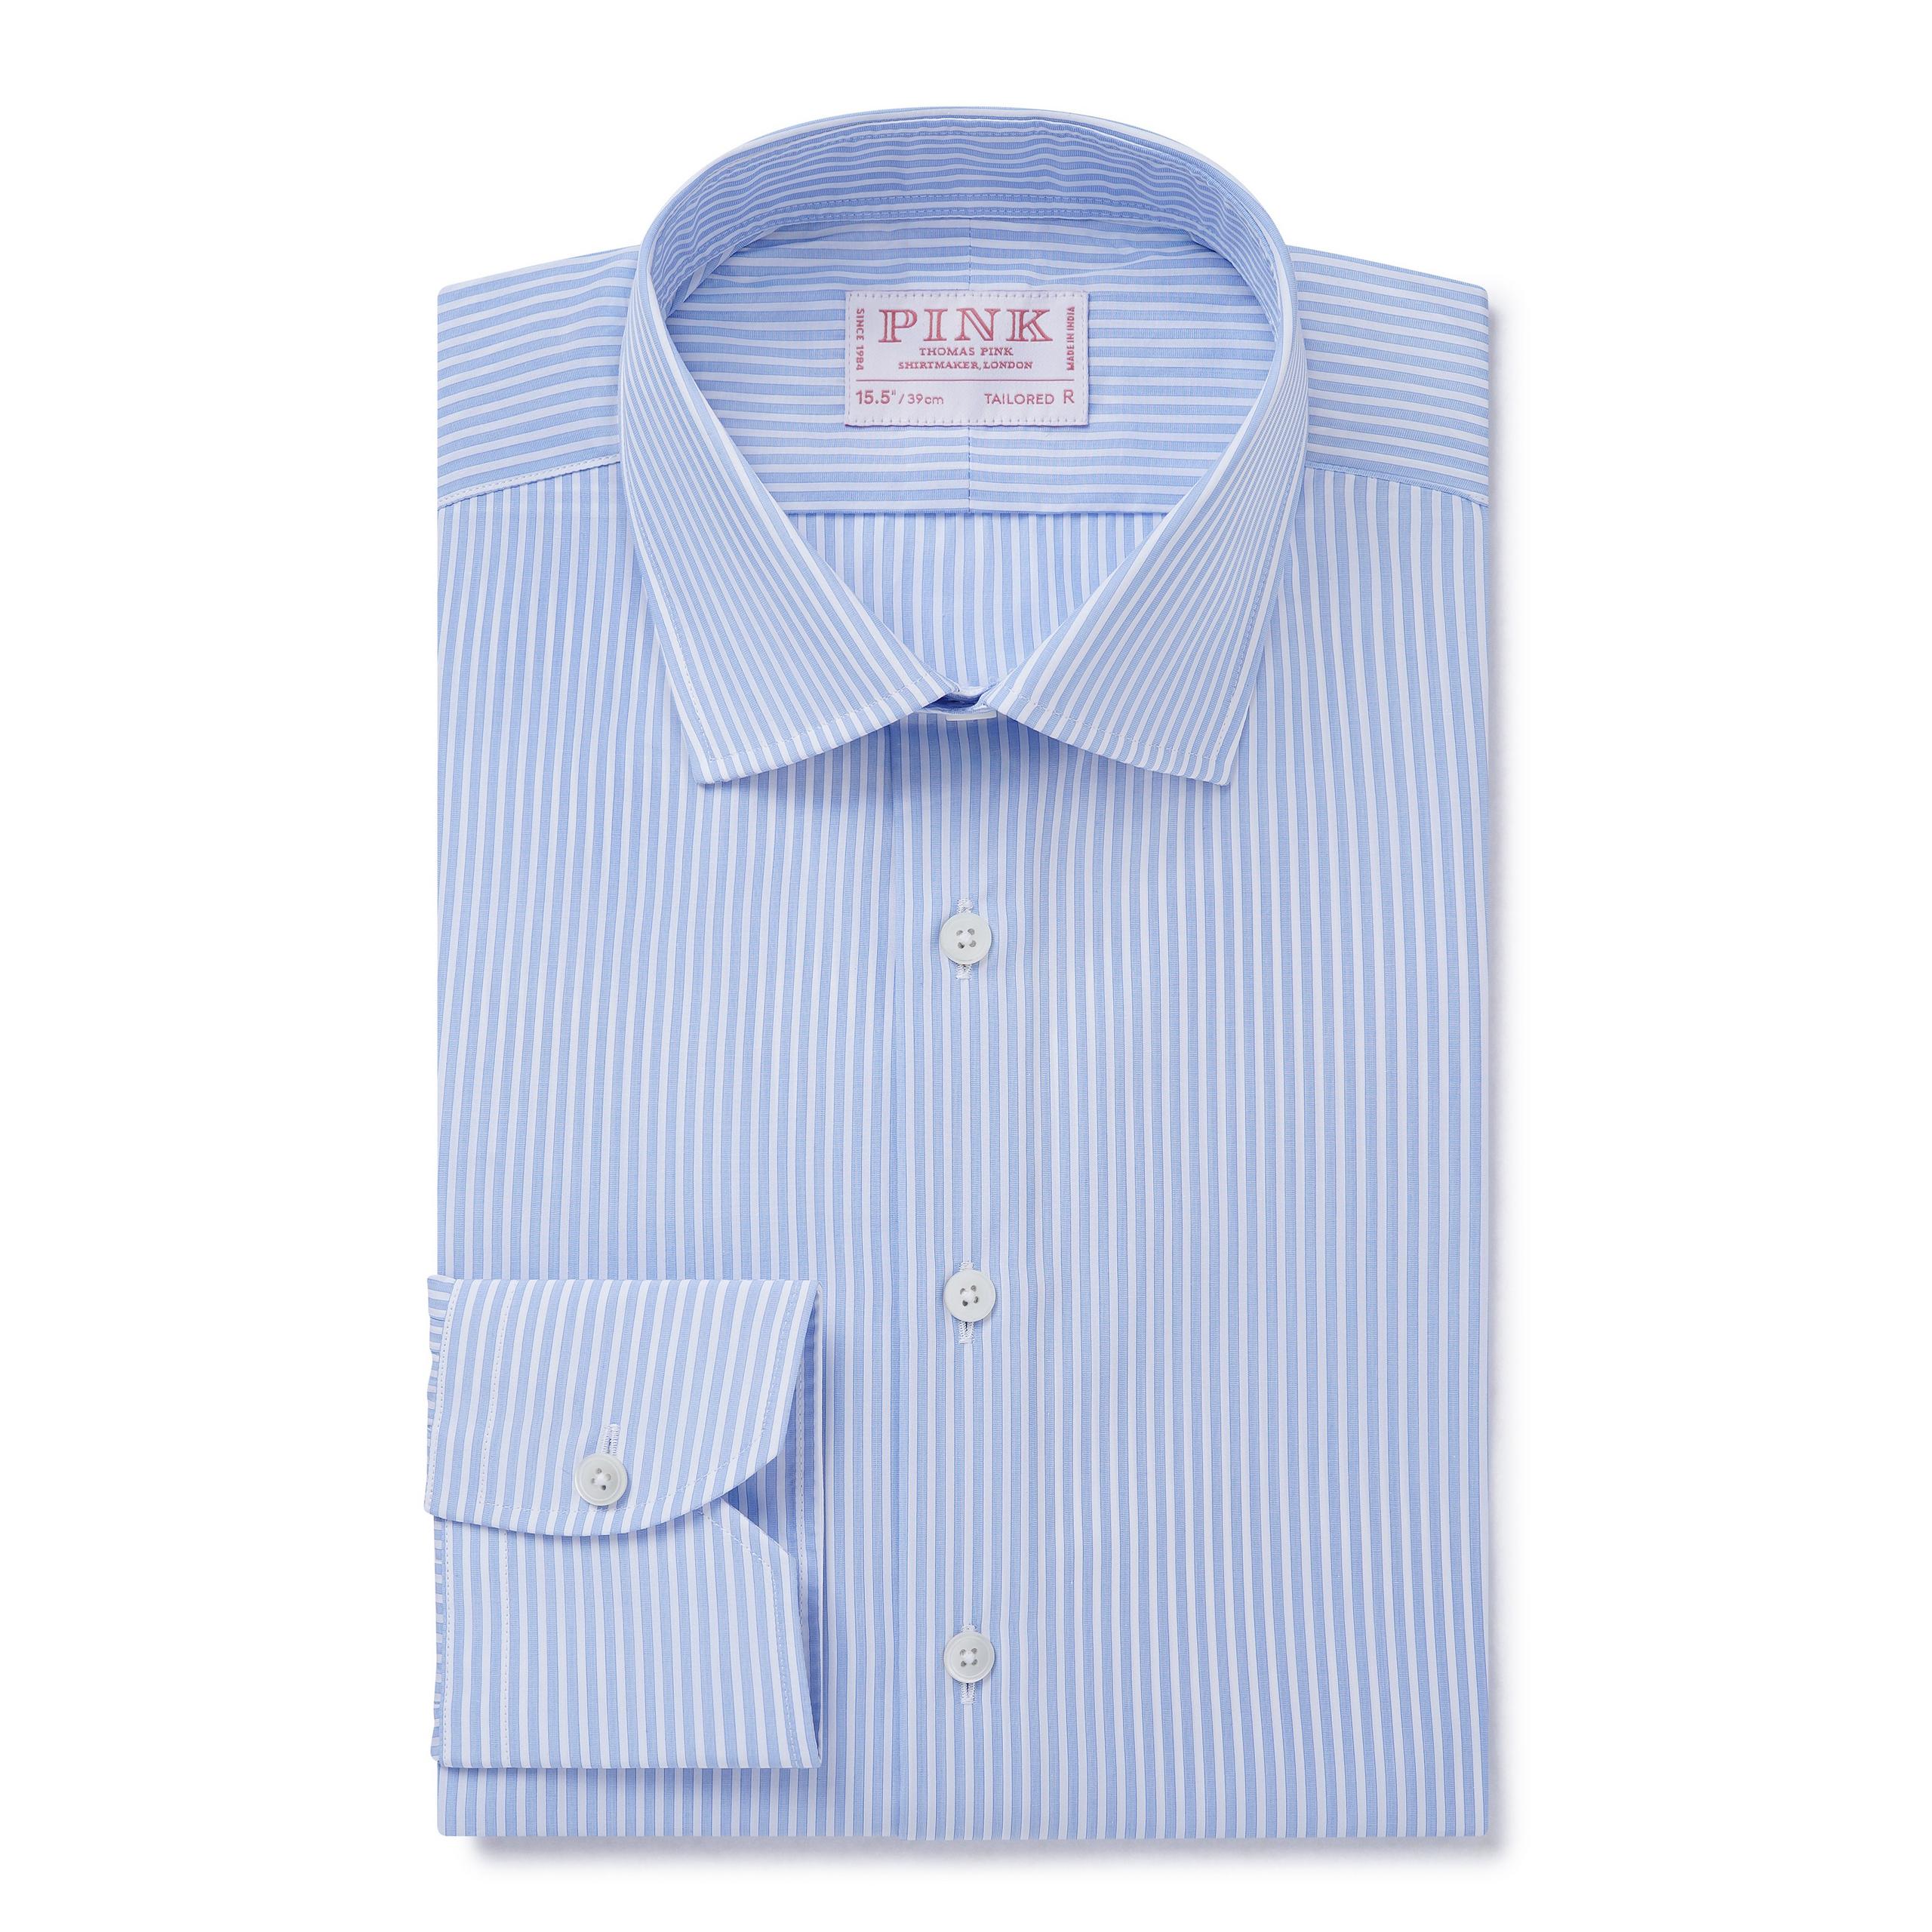 Pale Blue & White Tailored Fit Formal Egyptian Cotton Stripe Shirt